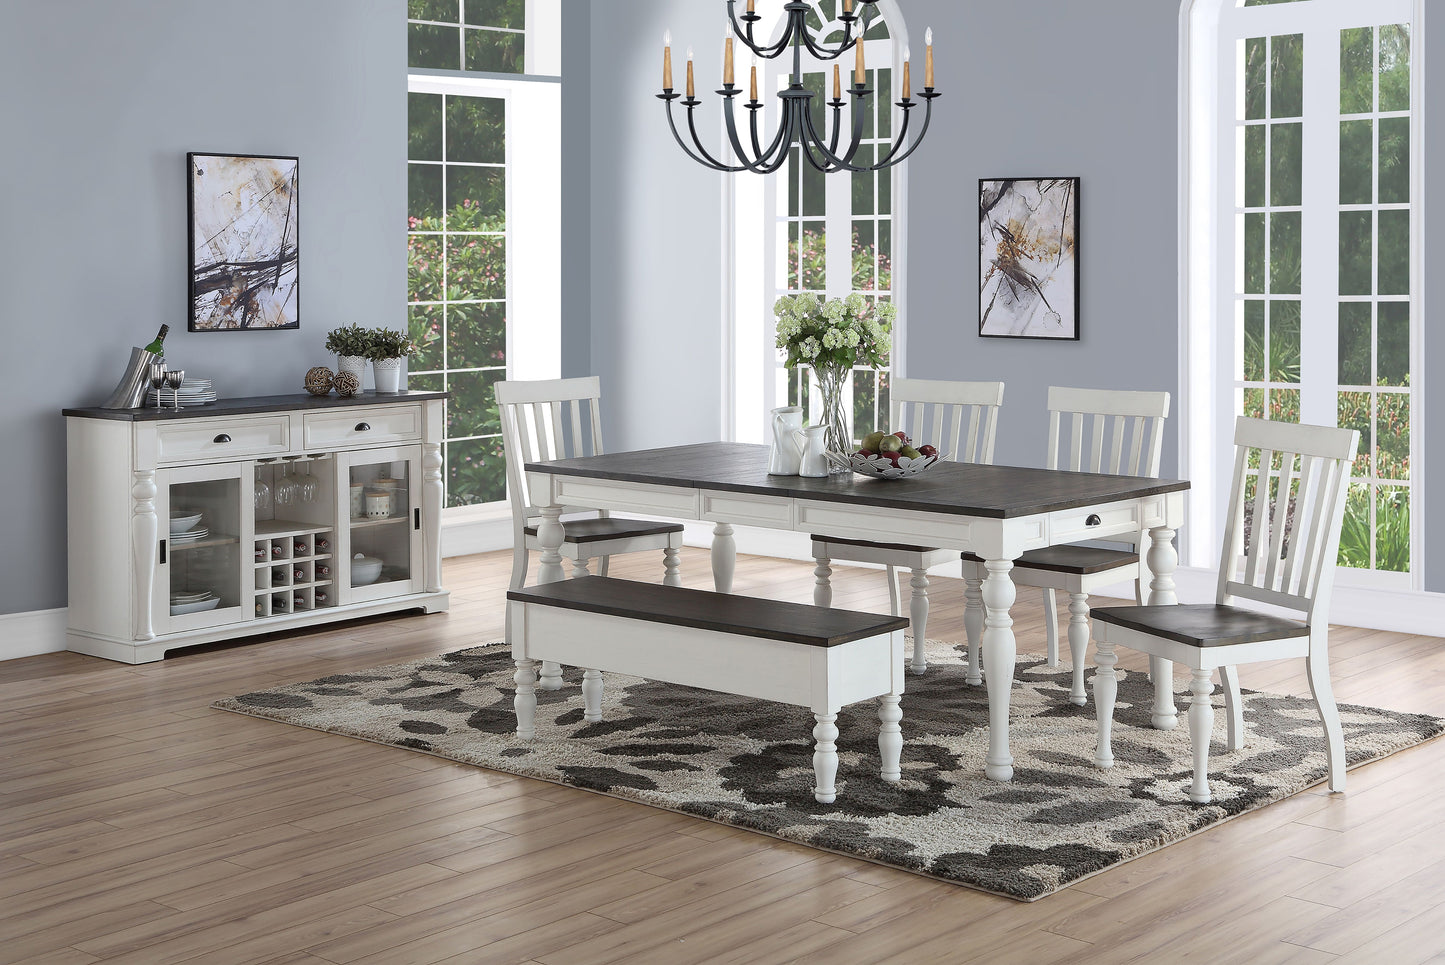 Joanna 4 Piece Dining Set With 2 Chairs, Bench